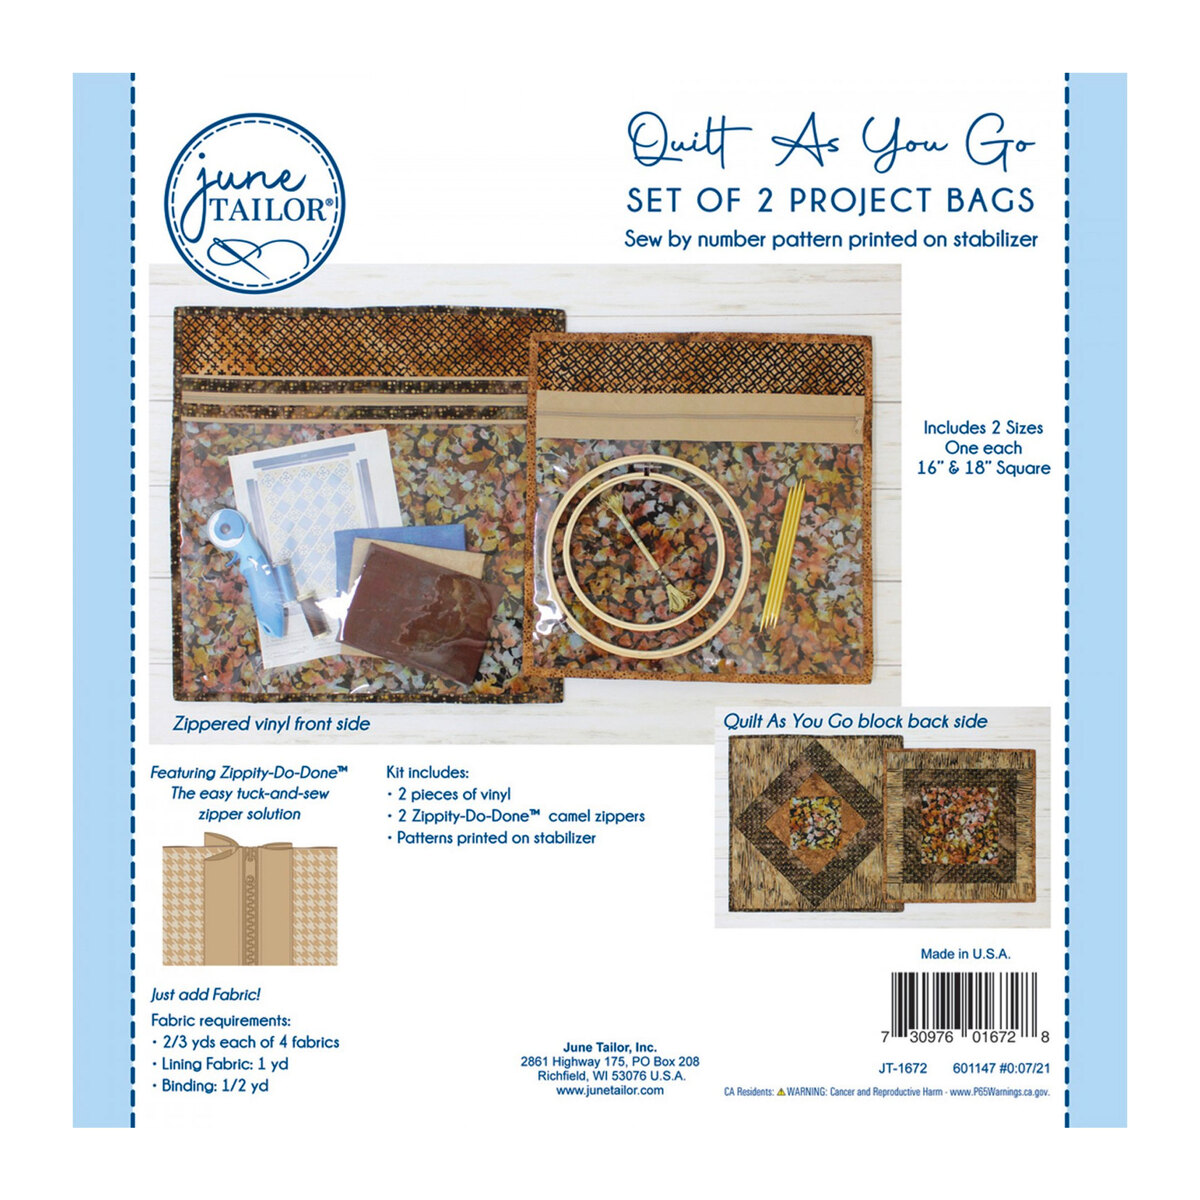 Quilt As You Go Set of 2 Project Bags - Camel Zipper